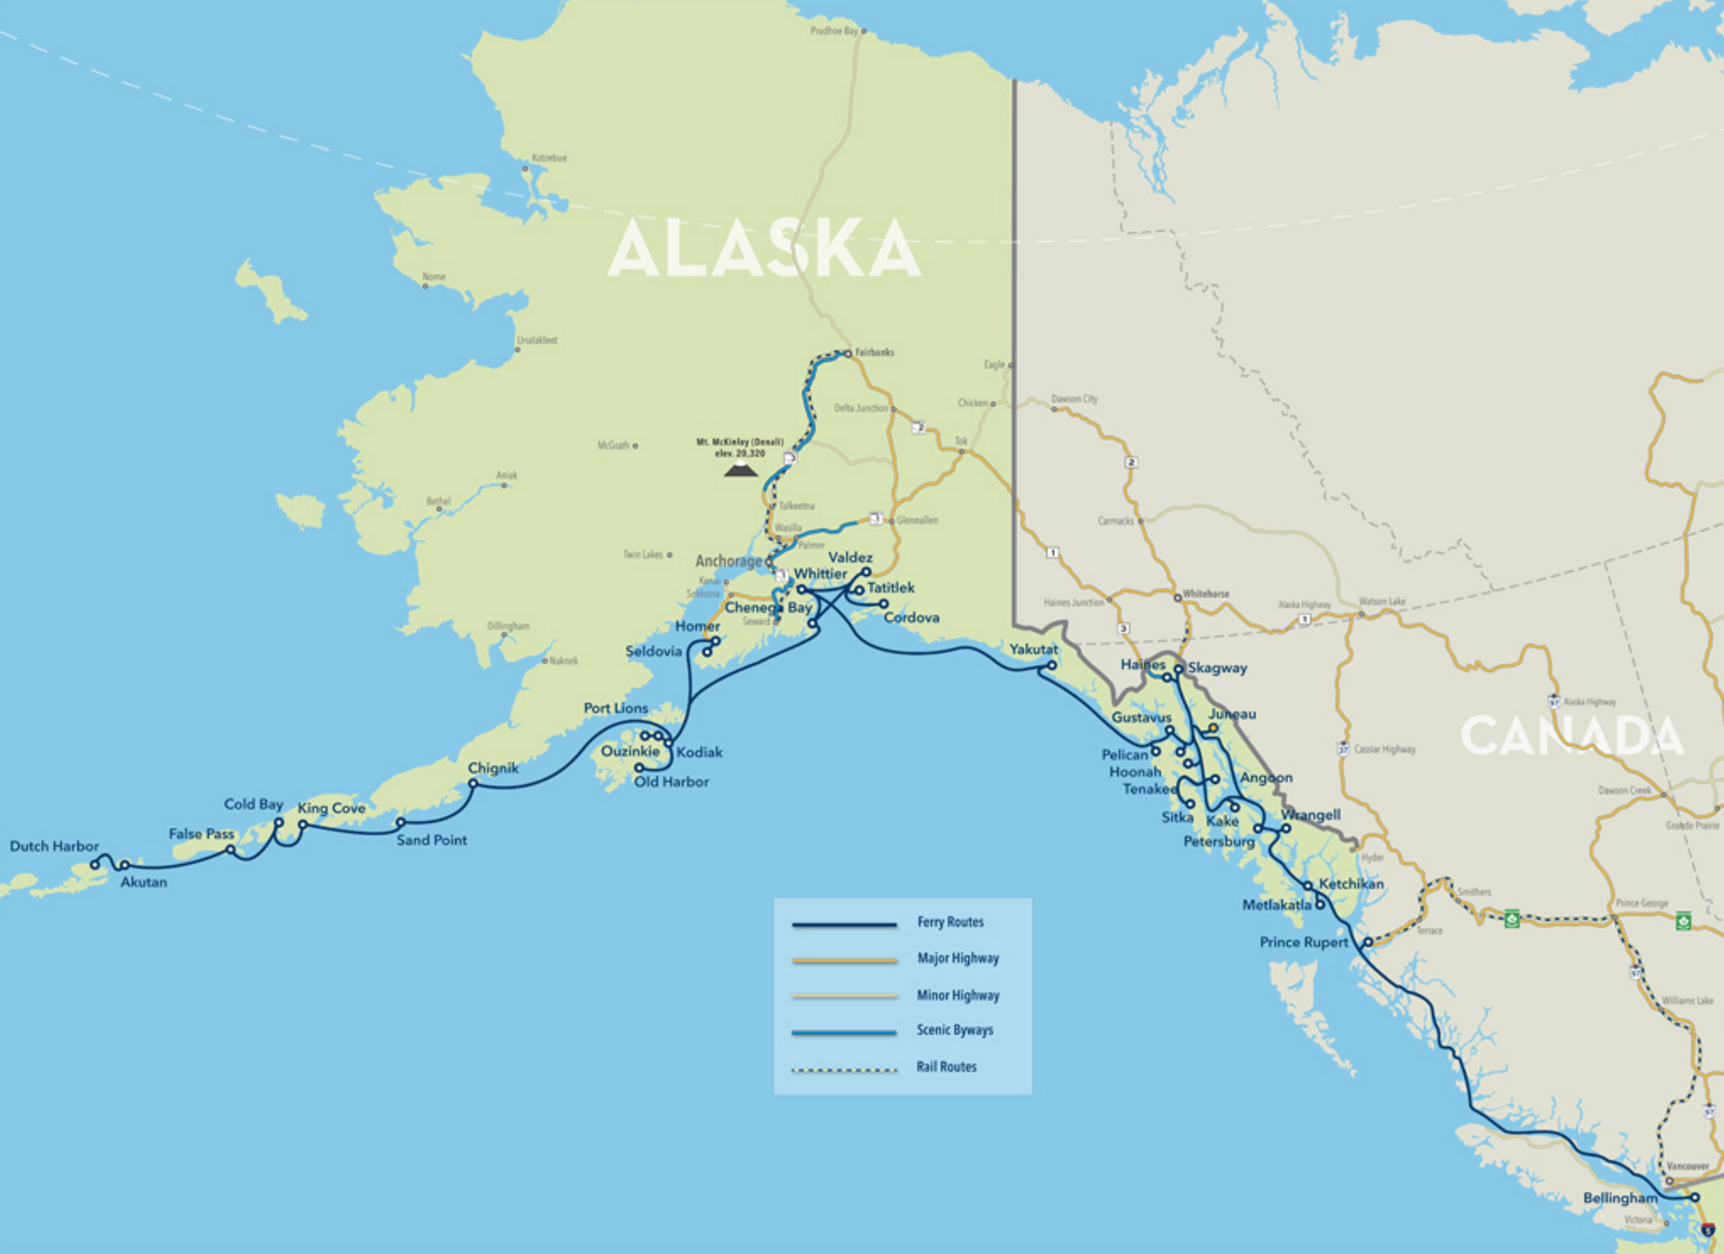 Alaska Ferry Route Map - seeing Alaska without a cruise